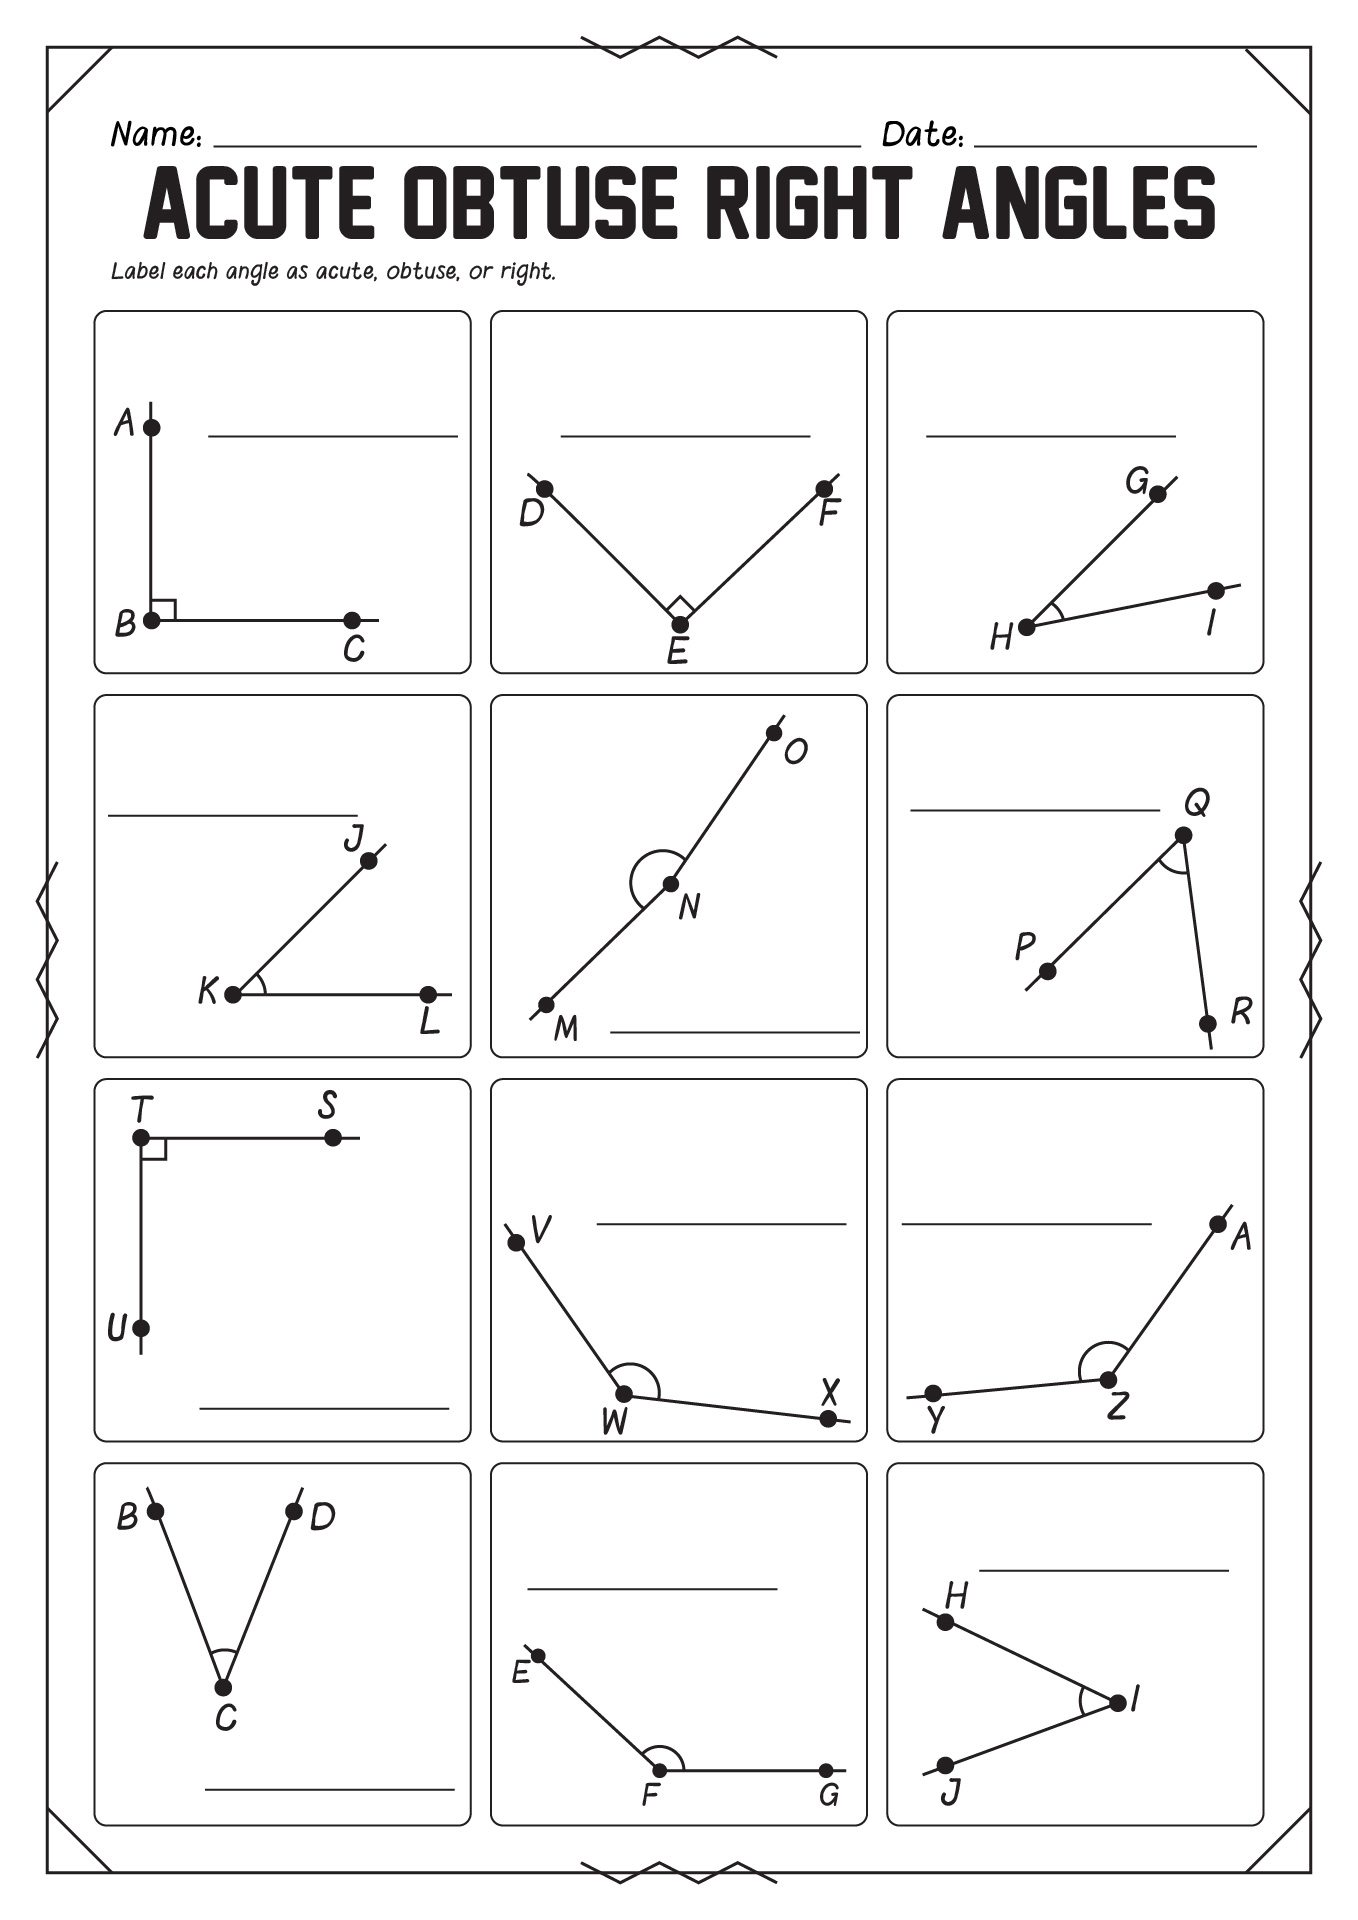 Acute Obtuse Right Angles Worksheet